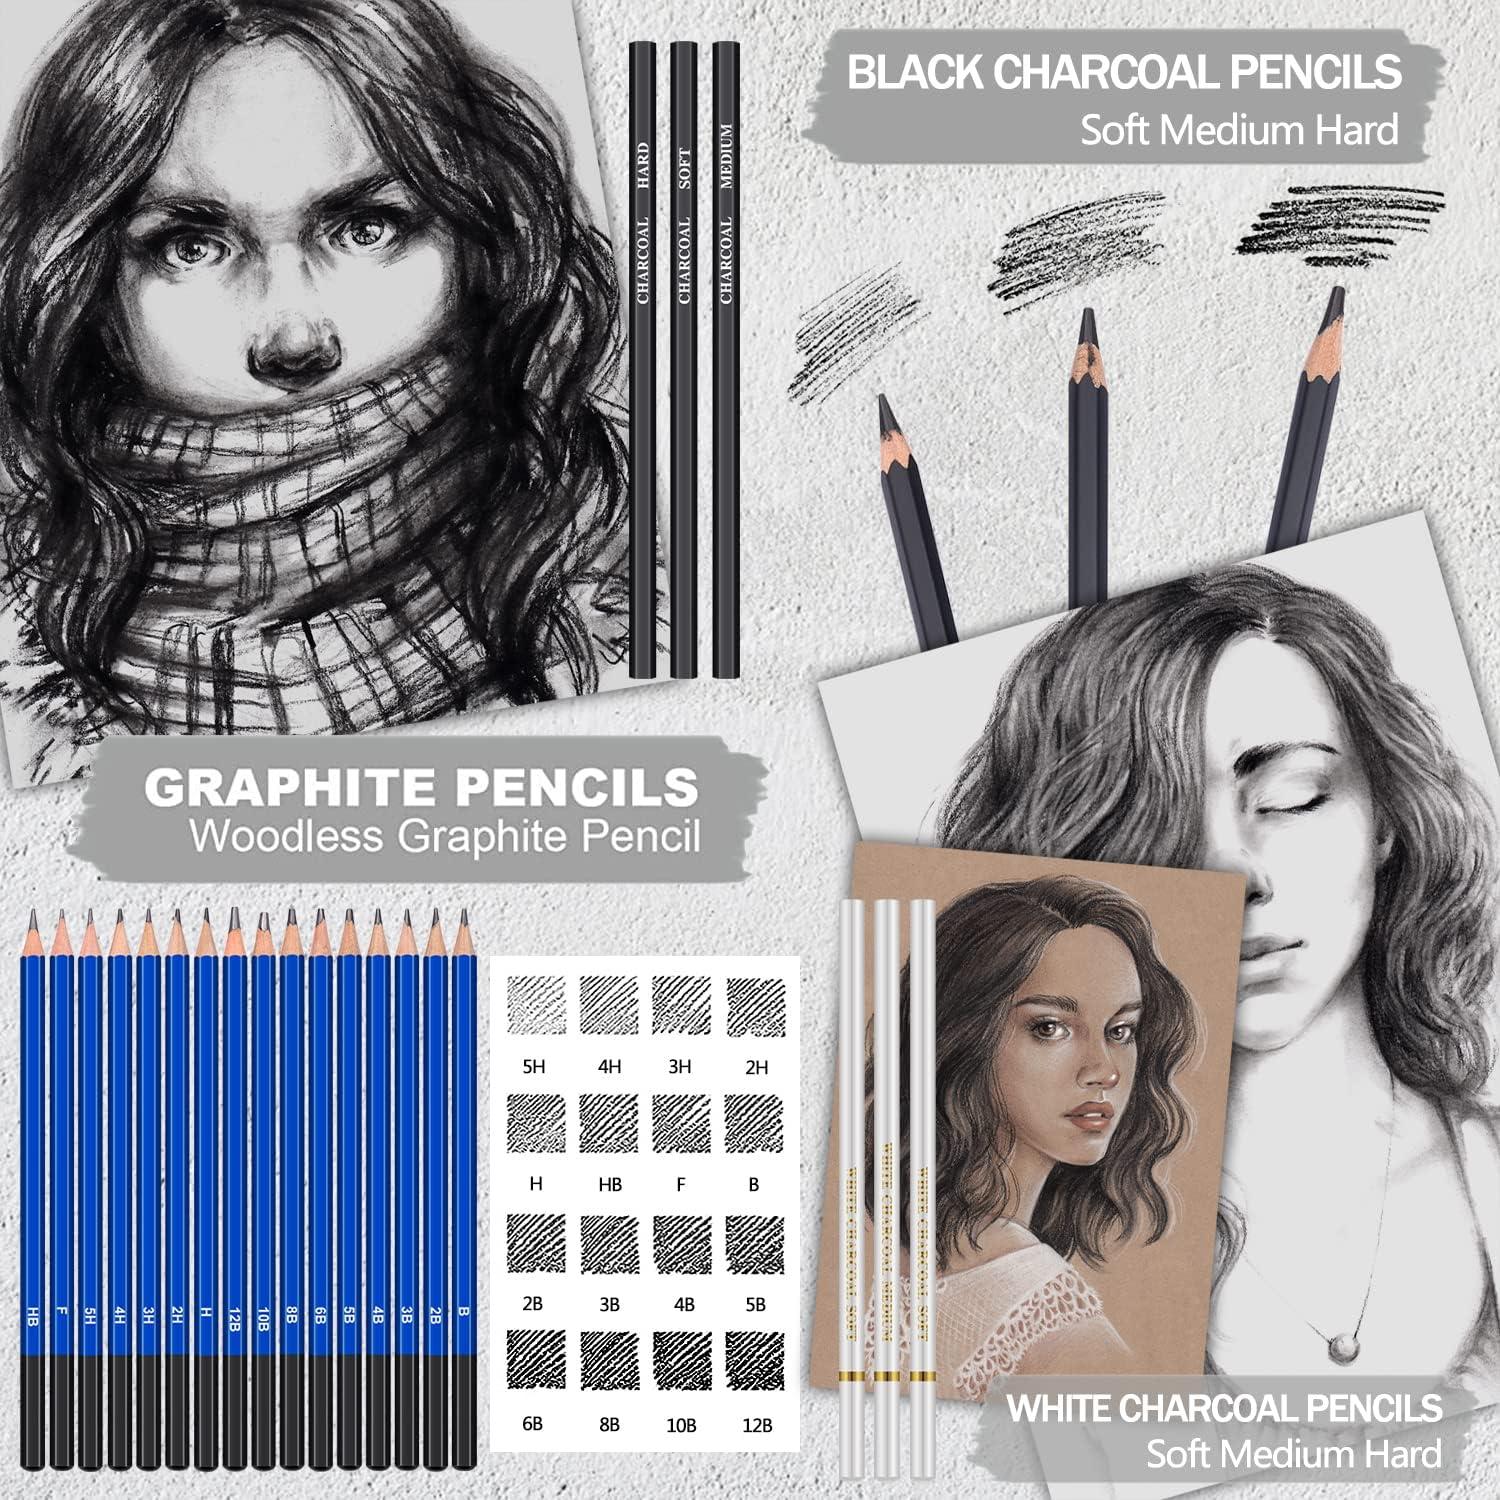 PANDAFLY Professional Charcoal Pencils Drawing Set, Skin Tone Colored Pencils, Colour Charcoal Pencils, Pastel Chalk Pencils for Sketching, Shading, C